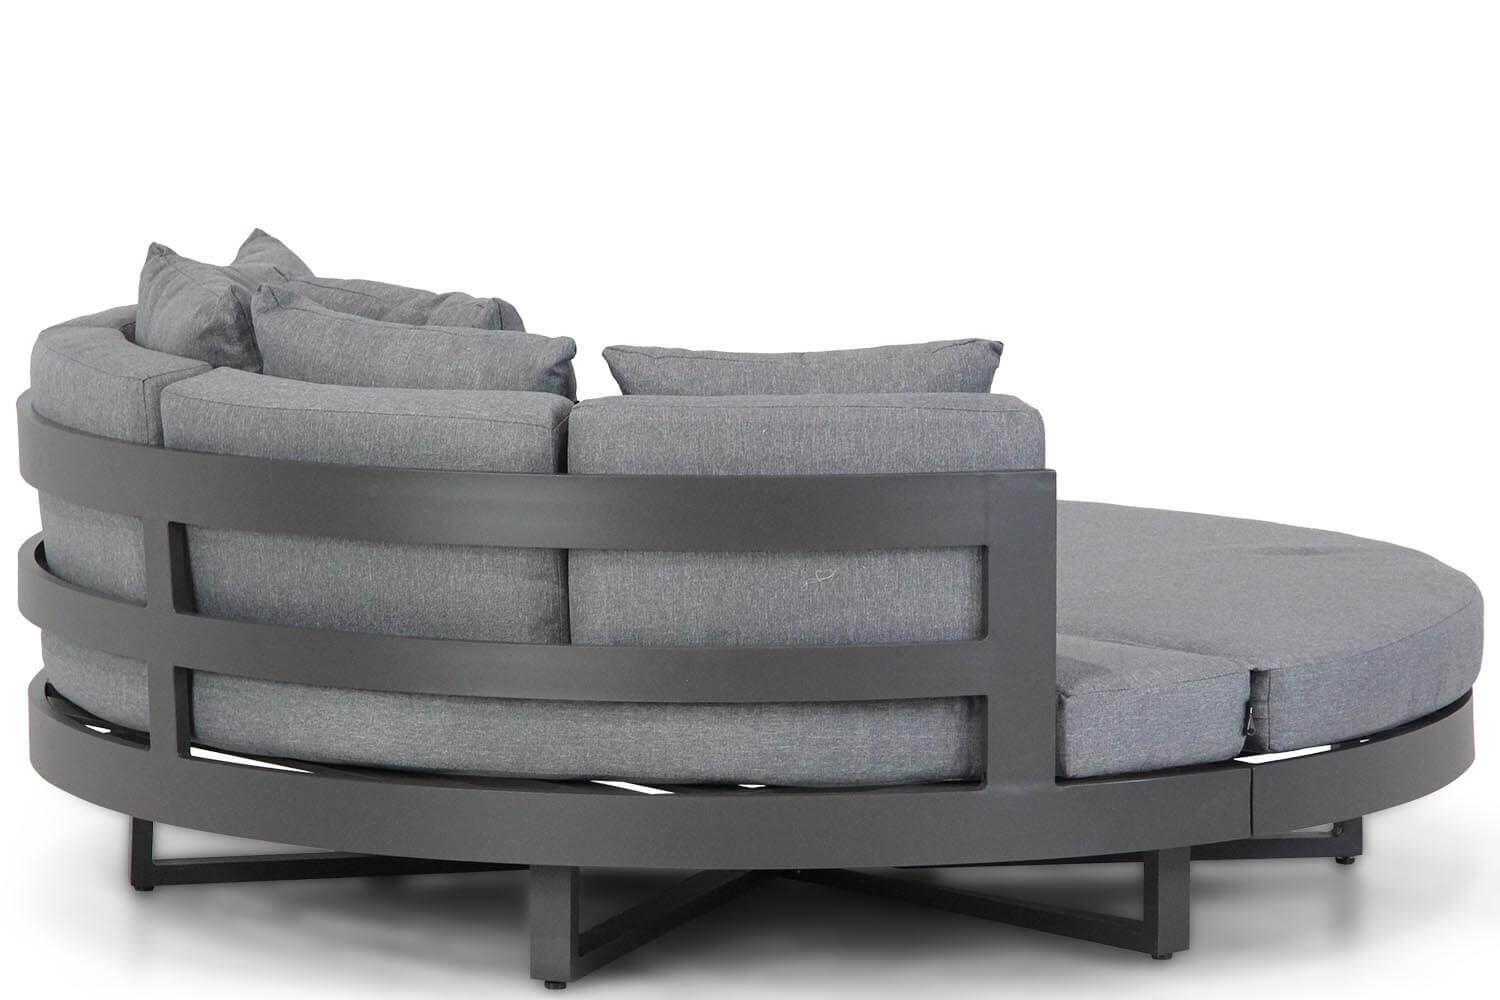 Santika Lakeview daybed antraciet